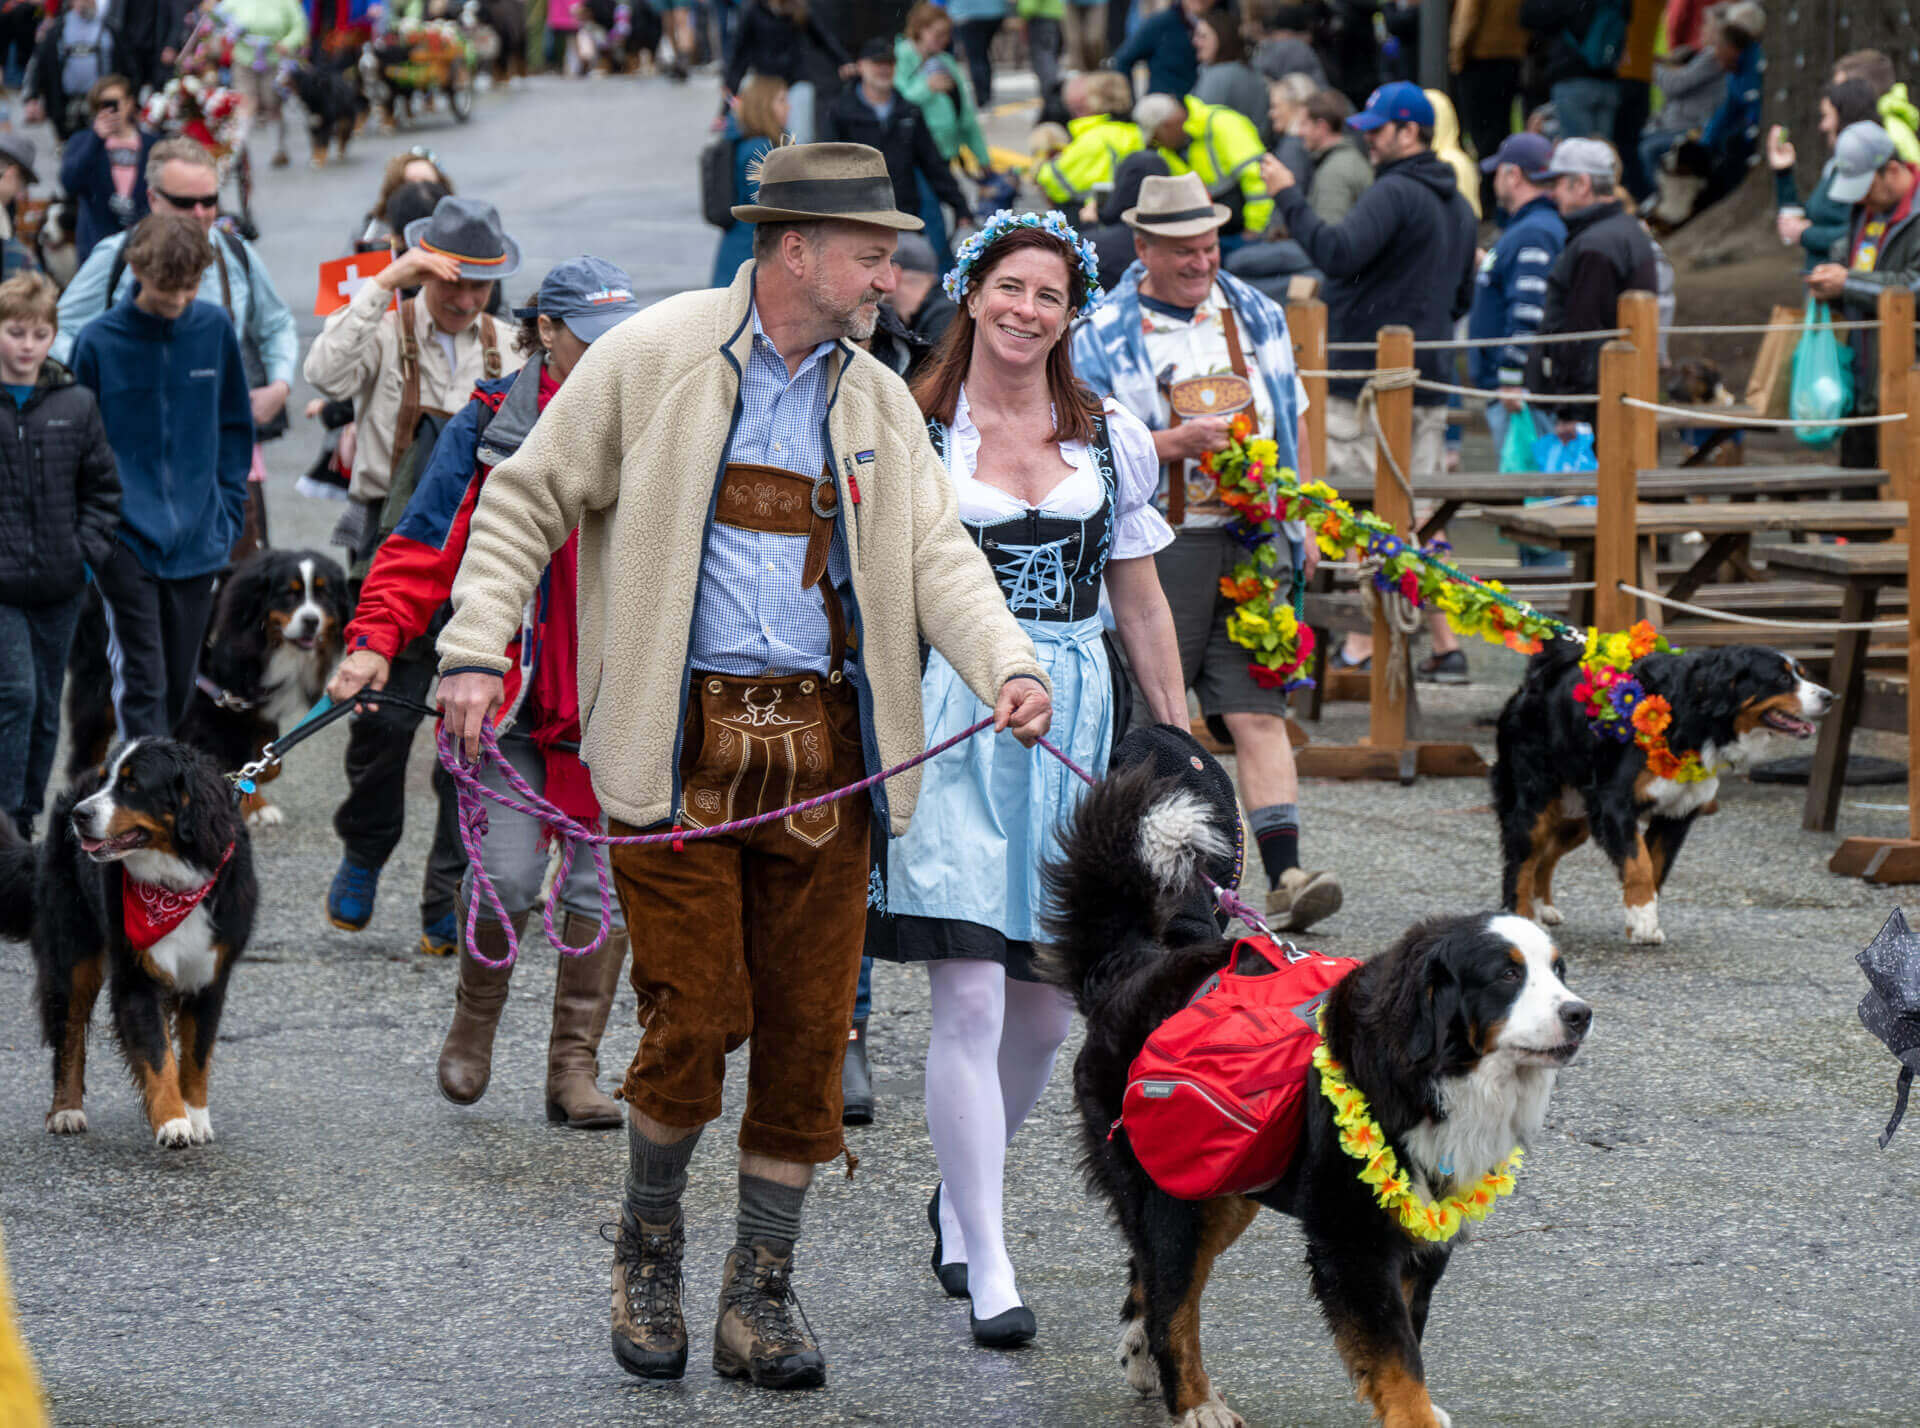 A man and woman wearing traditional German outfits walk a dog wearing a flower necklace and red backpack in Leavenworth Washington